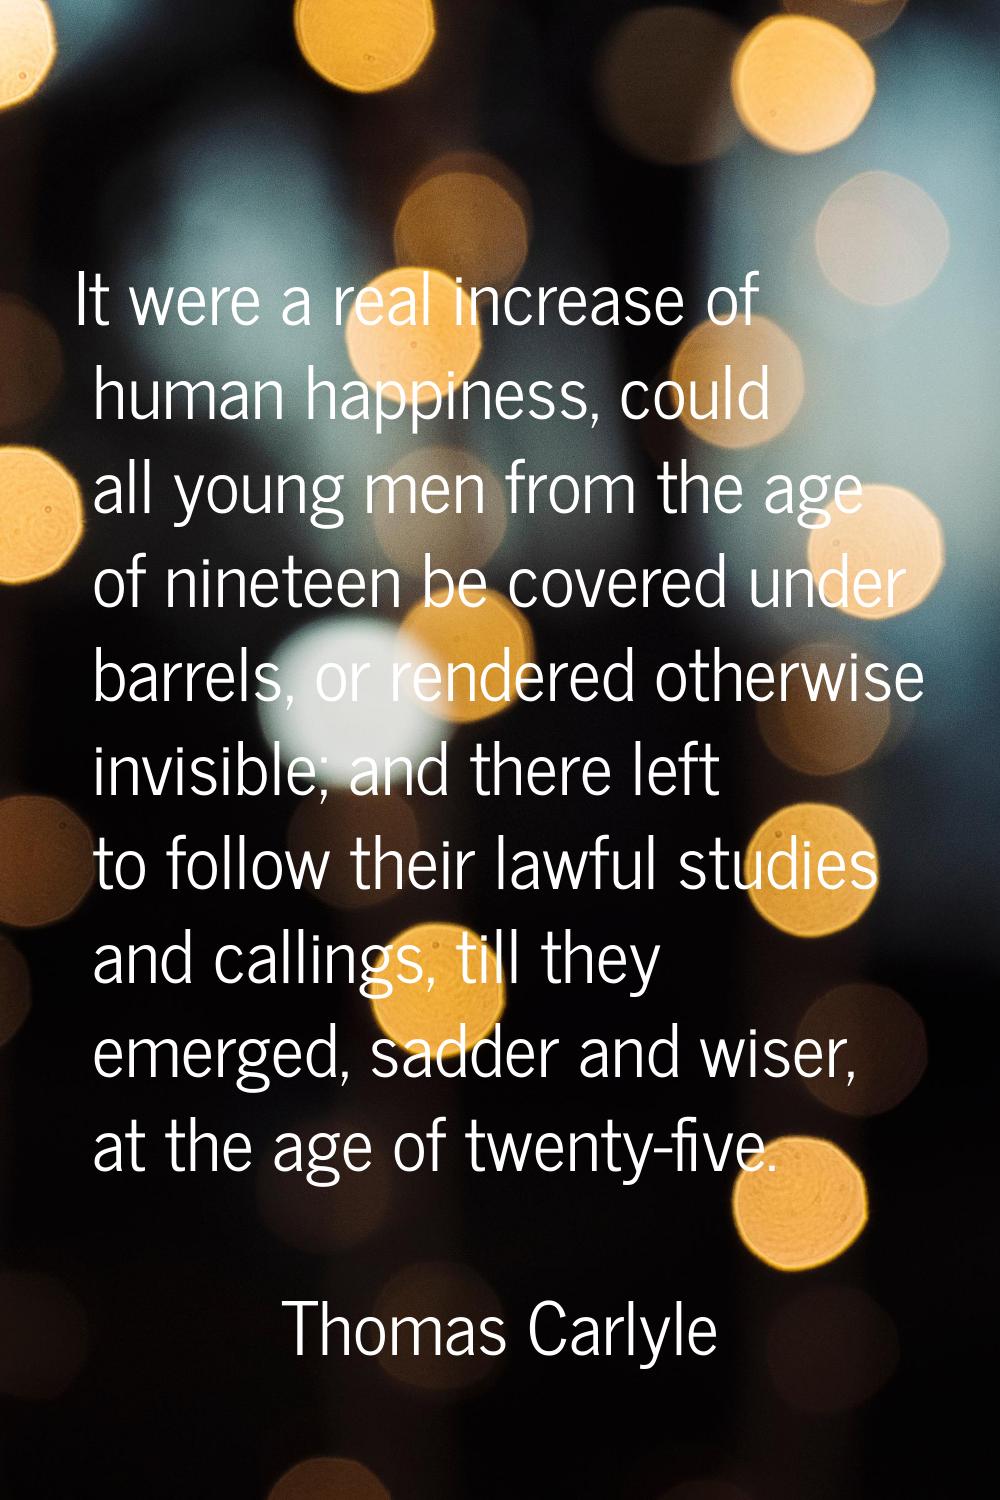 It were a real increase of human happiness, could all young men from the age of nineteen be covered